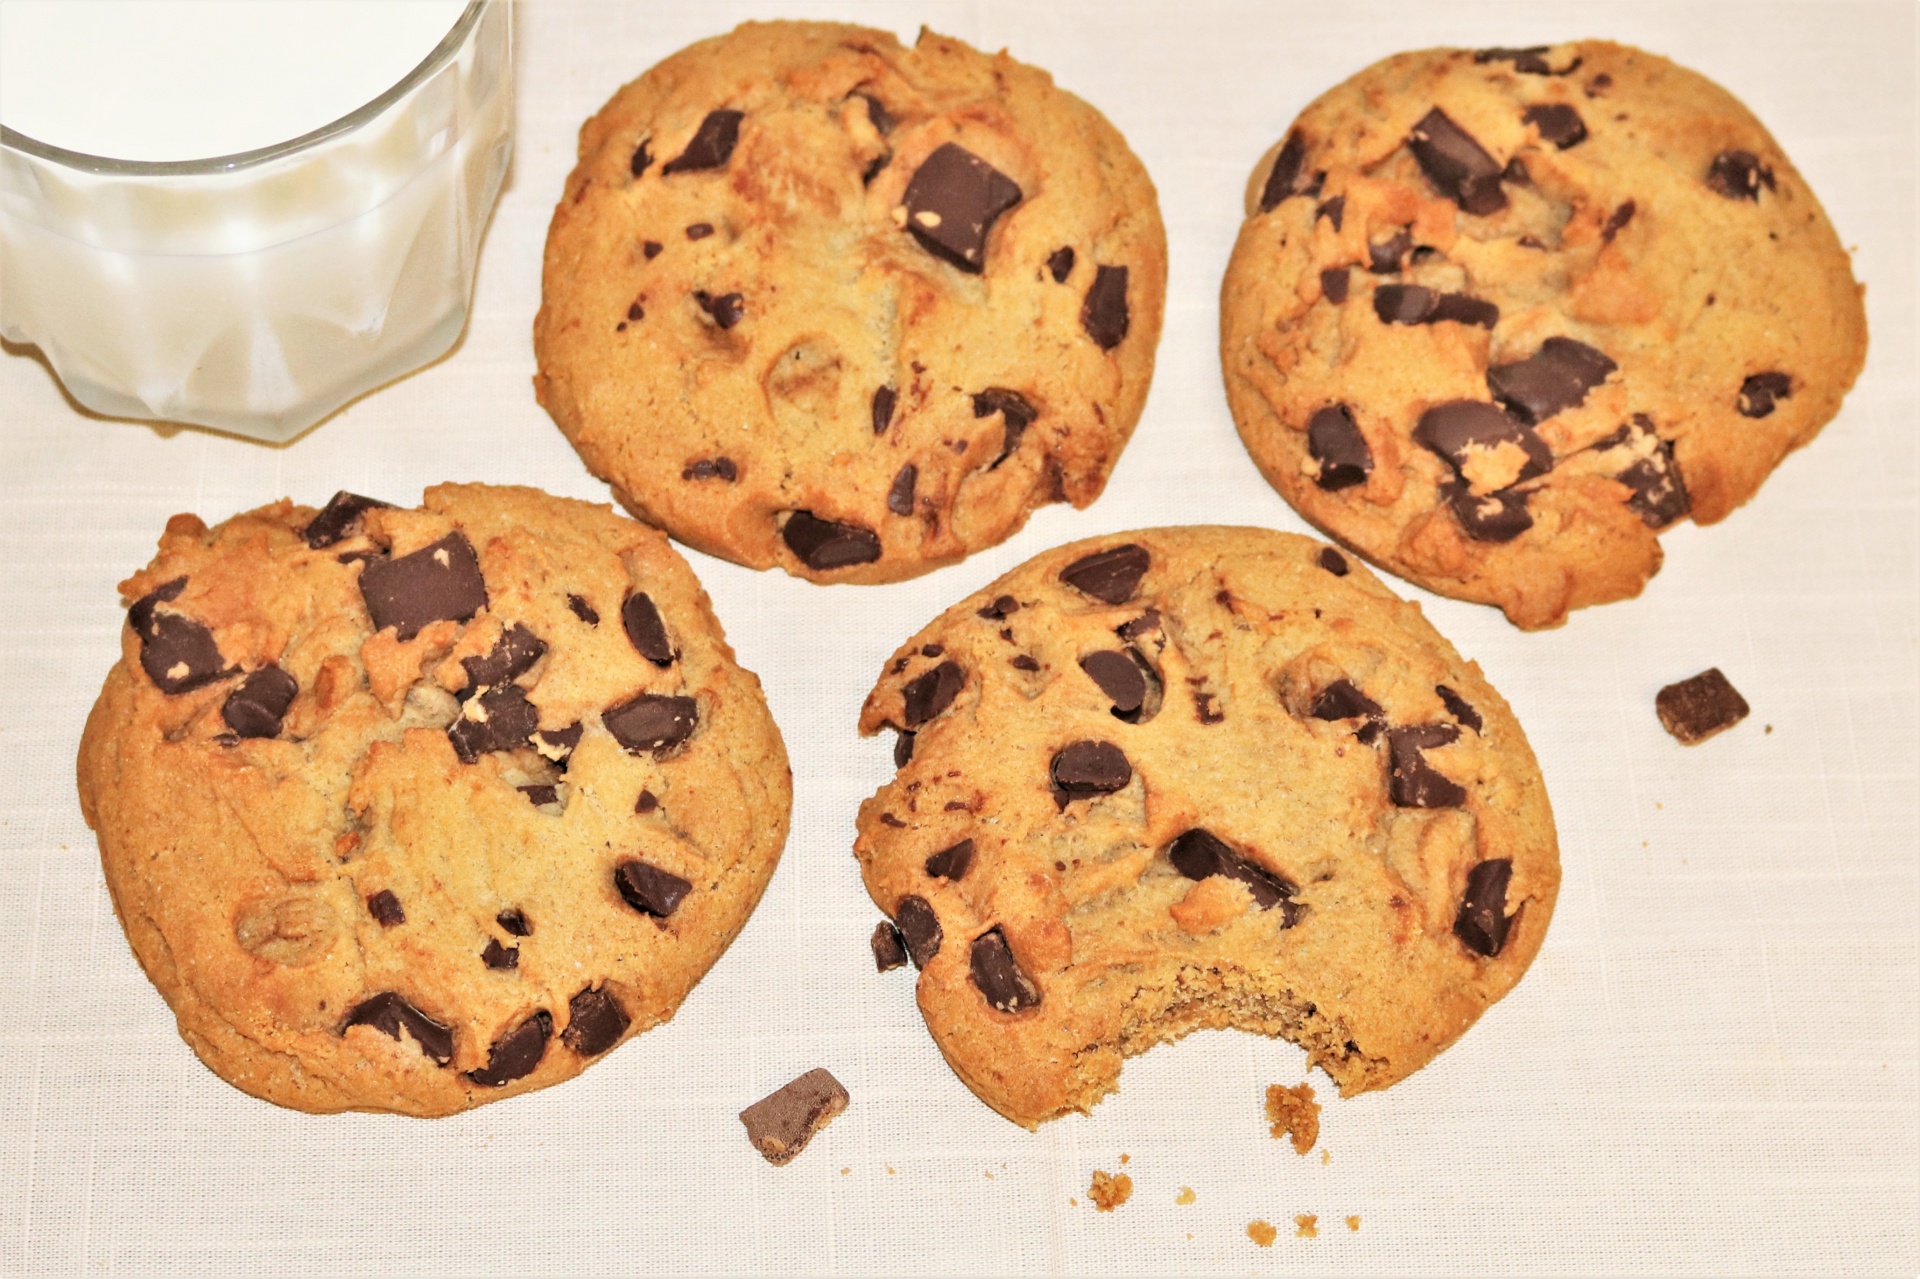 Four chocolate chip cookies and a glass of milk on a white table.